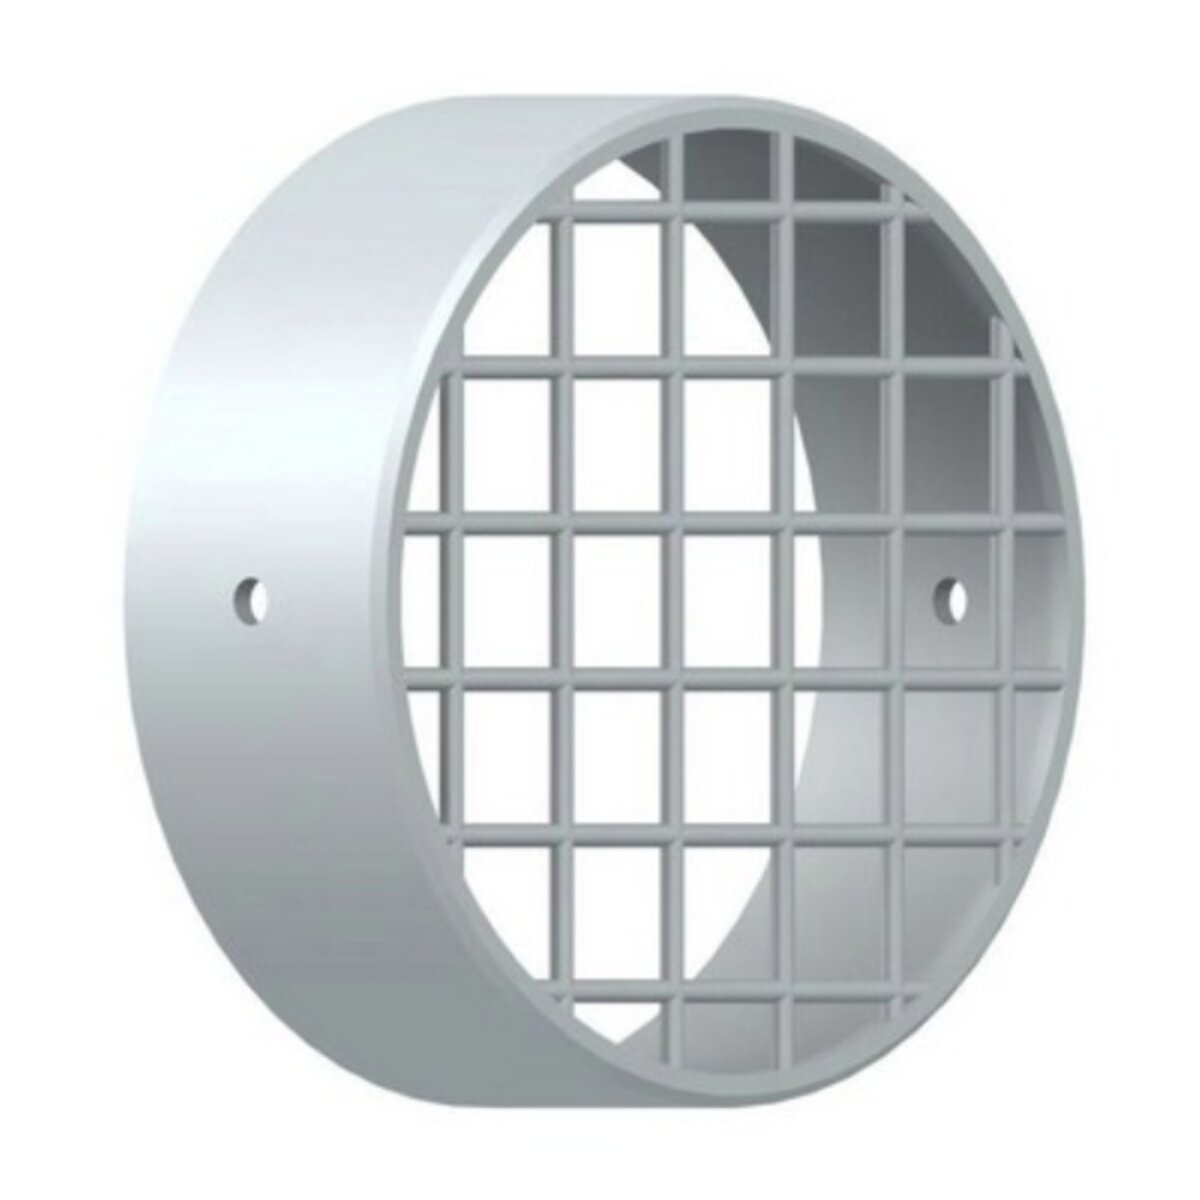 Anti-intrusion suction grille for condensing boiler fumes outlet diam. 80mm. in pp